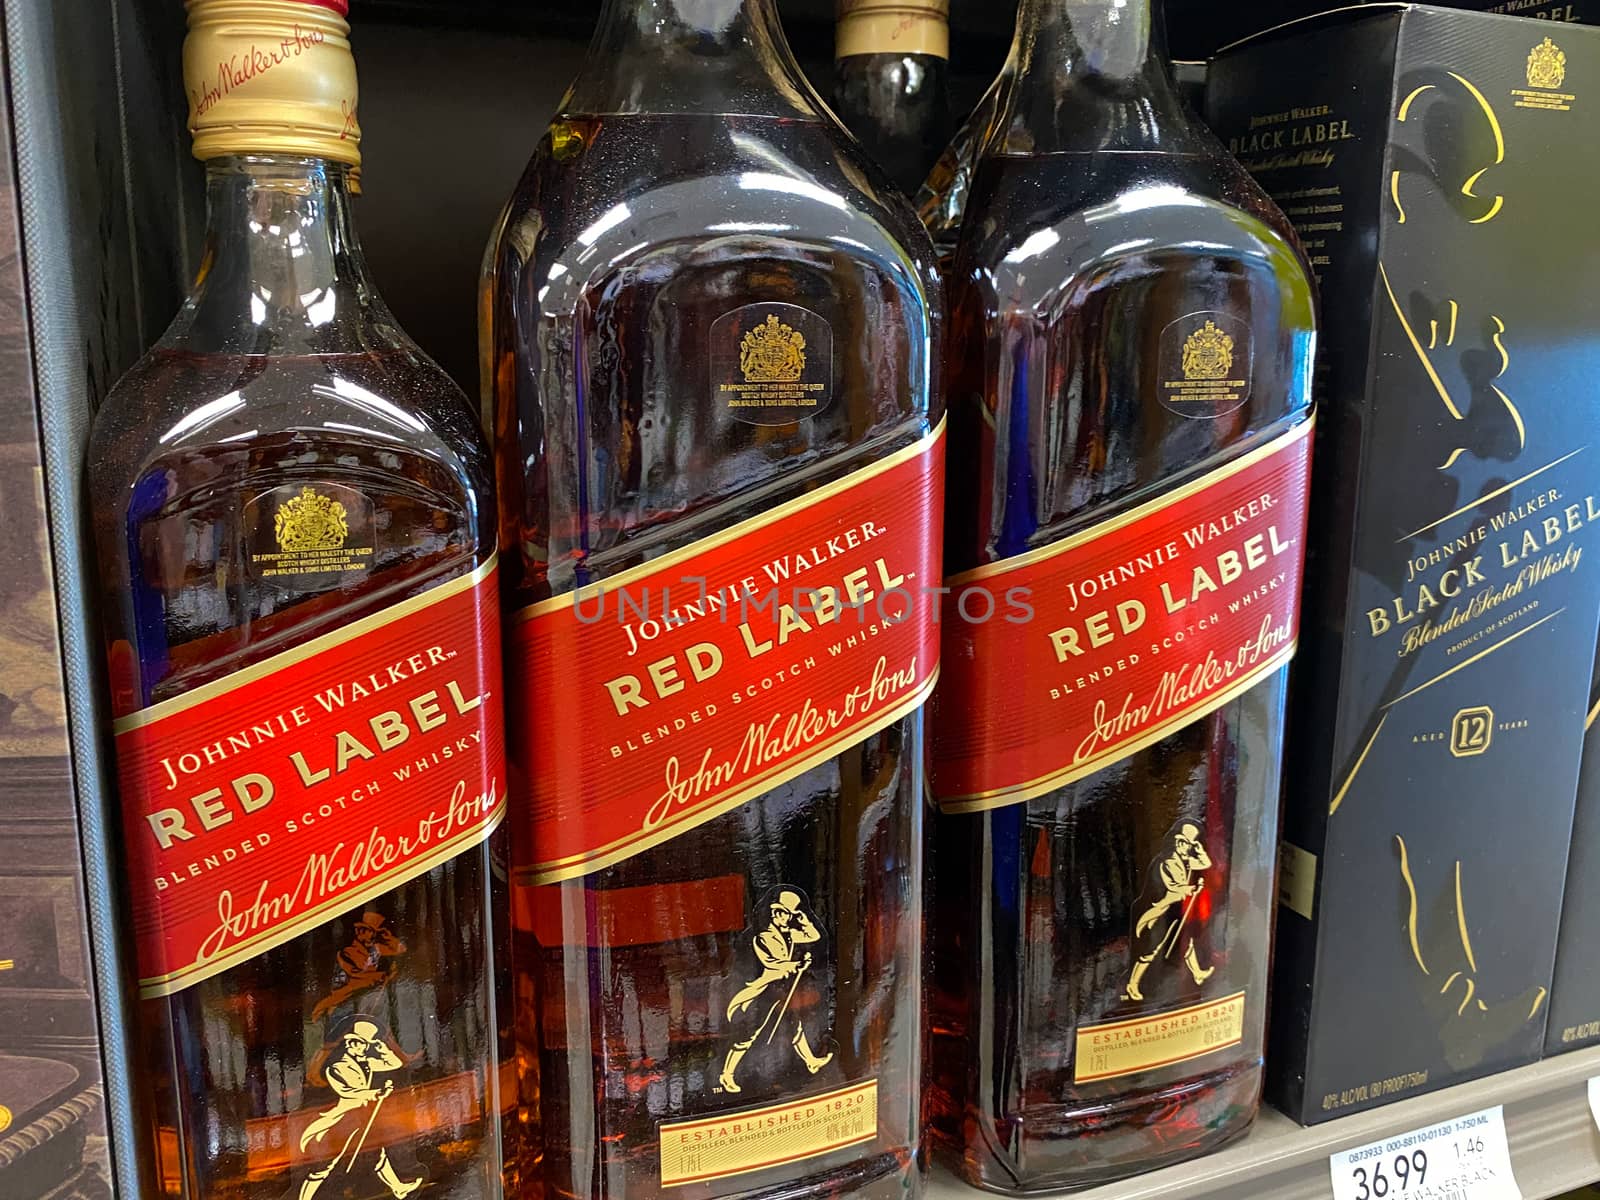 Orlando,FL/USA -5/13/20: A display of Johnnie Walkder Red Label Blended Scotch Whisky at a Publix liqour store.